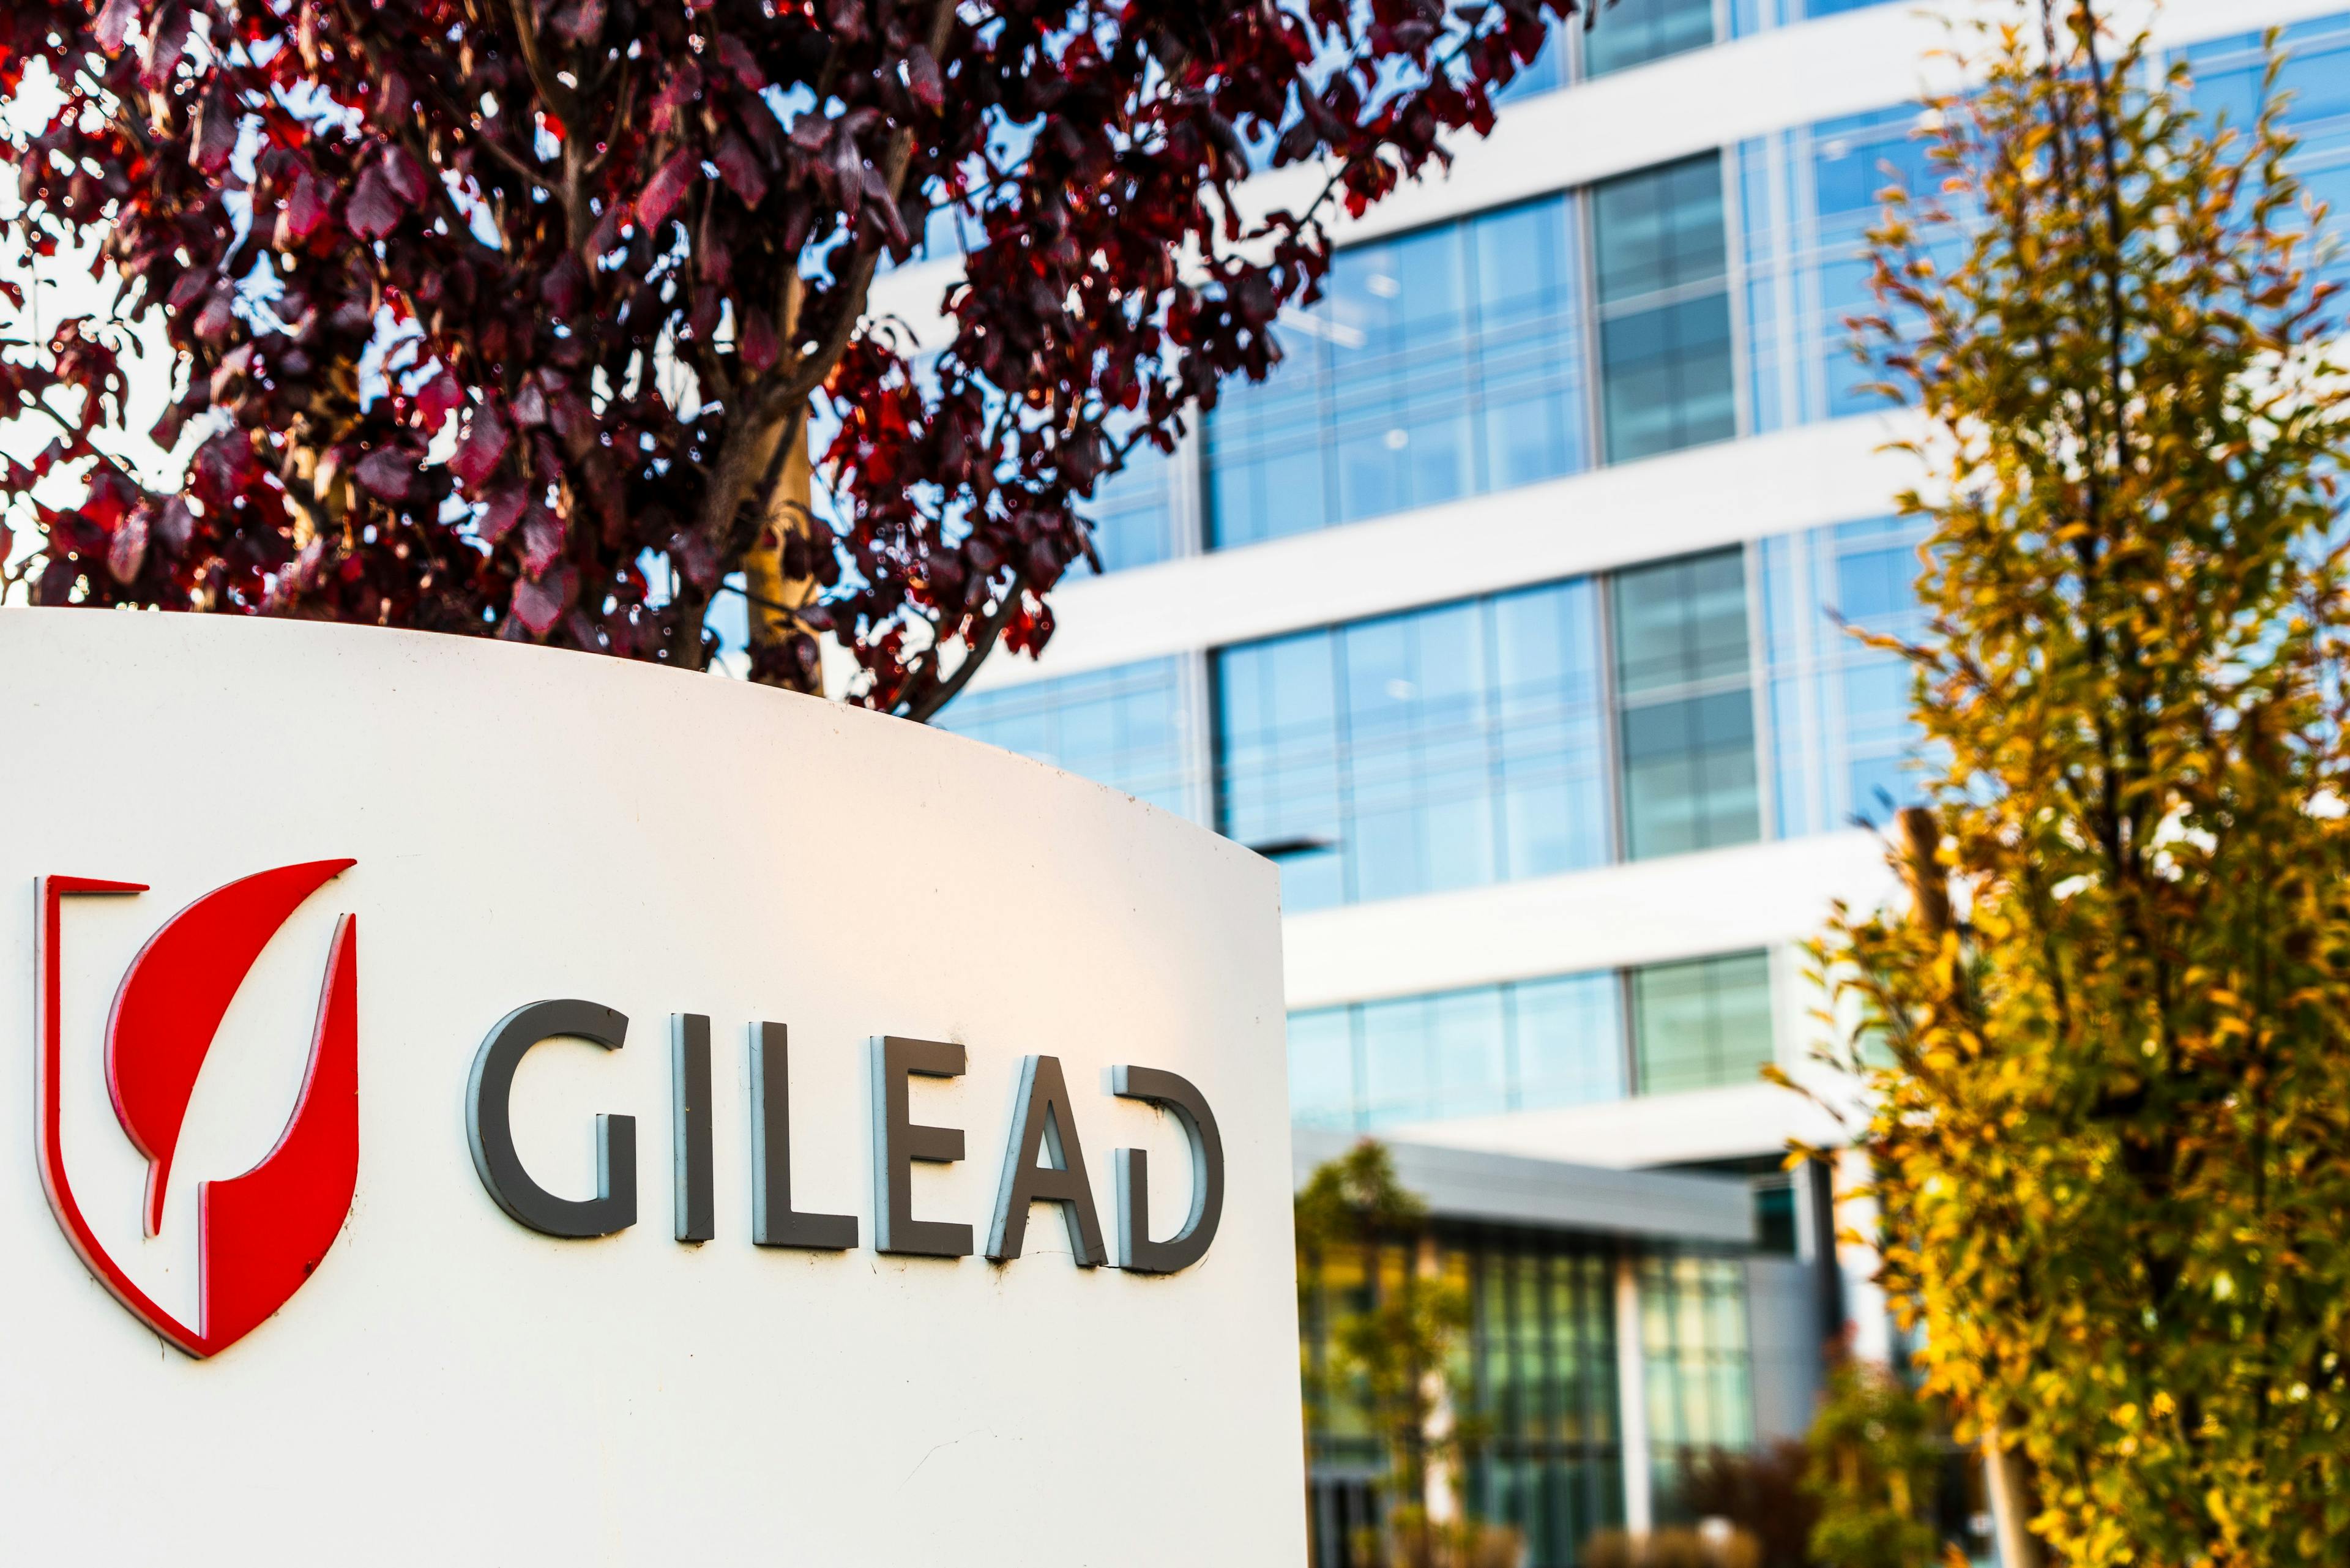 Gilead headquarters in Silicon Valley | Image Credit: Sundry Photography - stock.adobe.com